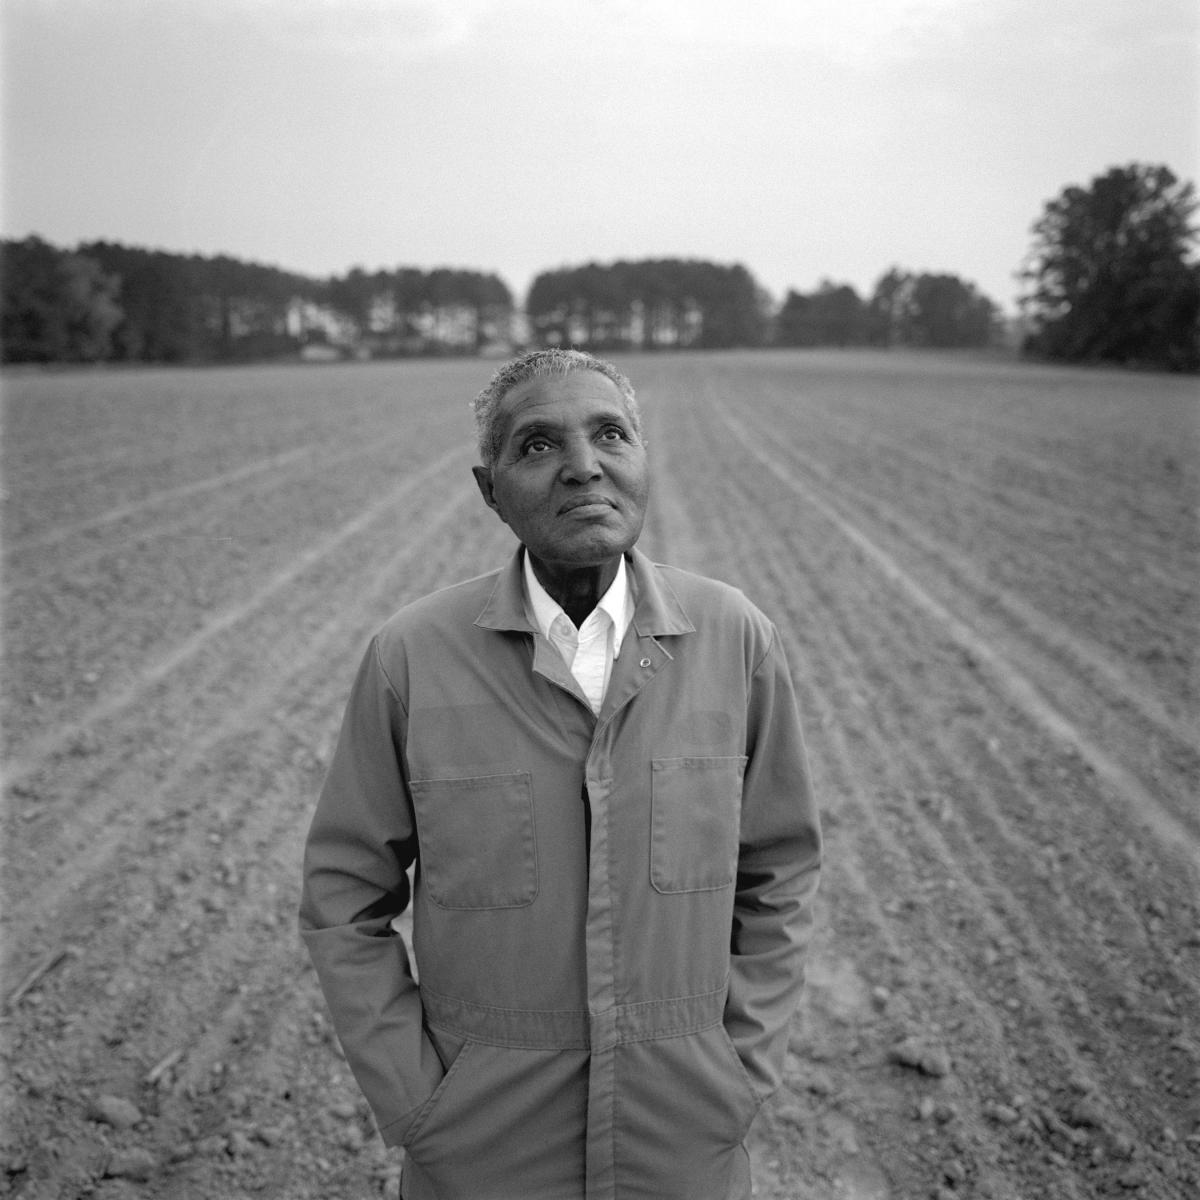 <p><center>Wake County, North Carolina:</center></p>
Griffen Todd, a third generation farmer, grows tobacco and soybeans and raises hogs. " I grew up on a farm and have been farming all my life. I believe the man upstairs has looked after this farm and my family." : Images : AMERICAN BLACK FARMERS PROJECT - John Ficara